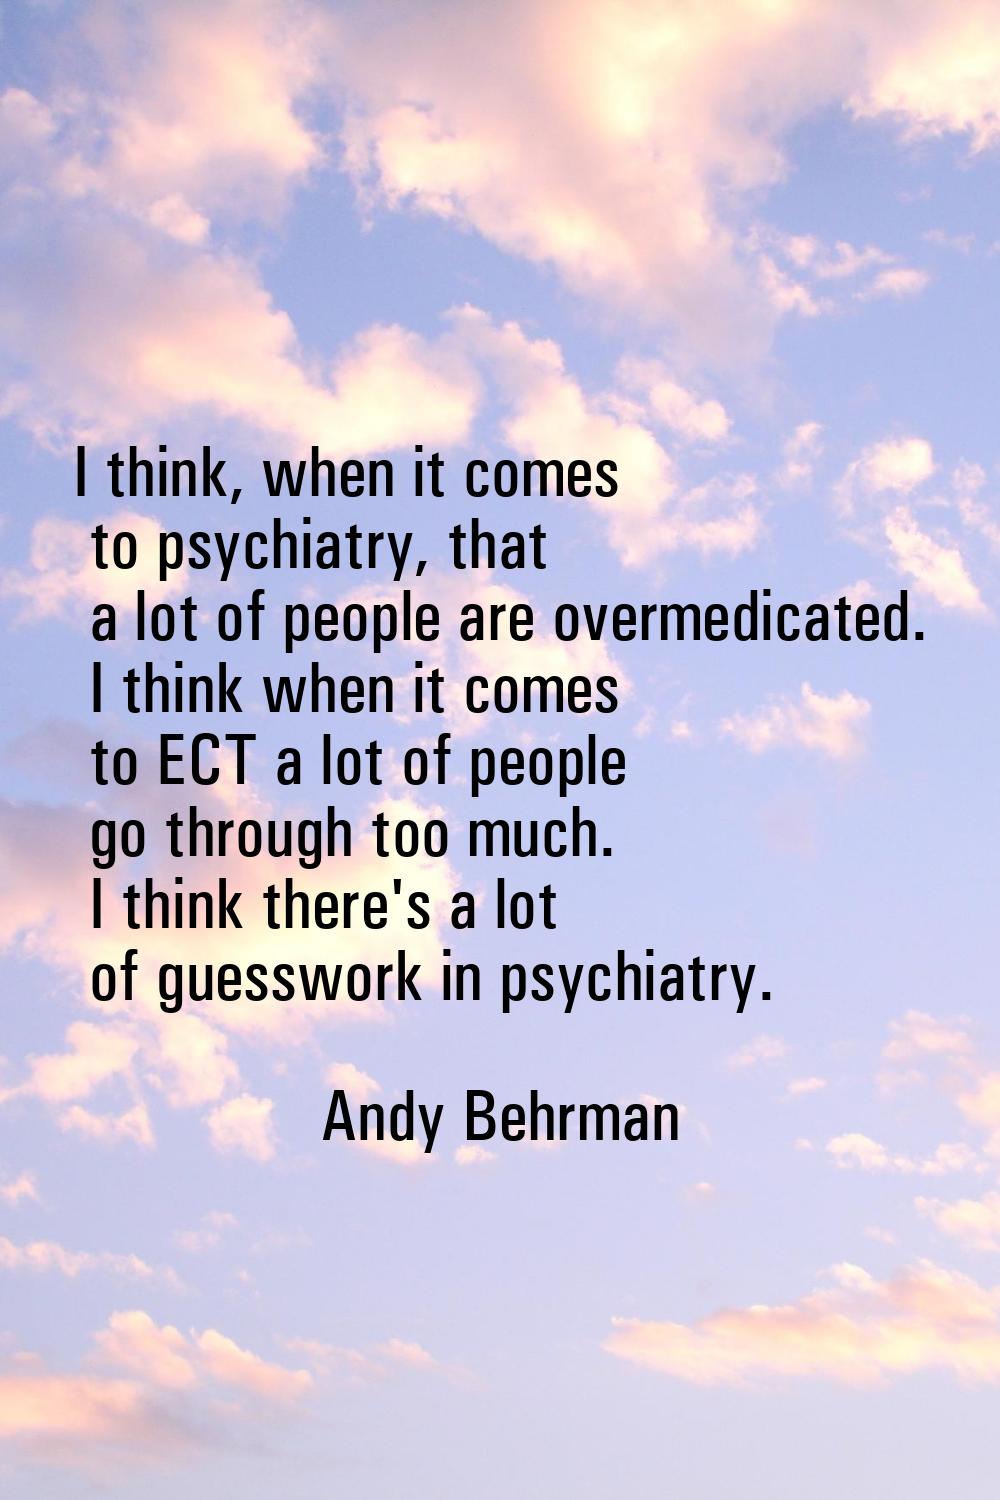 I think, when it comes to psychiatry, that a lot of people are overmedicated. I think when it comes